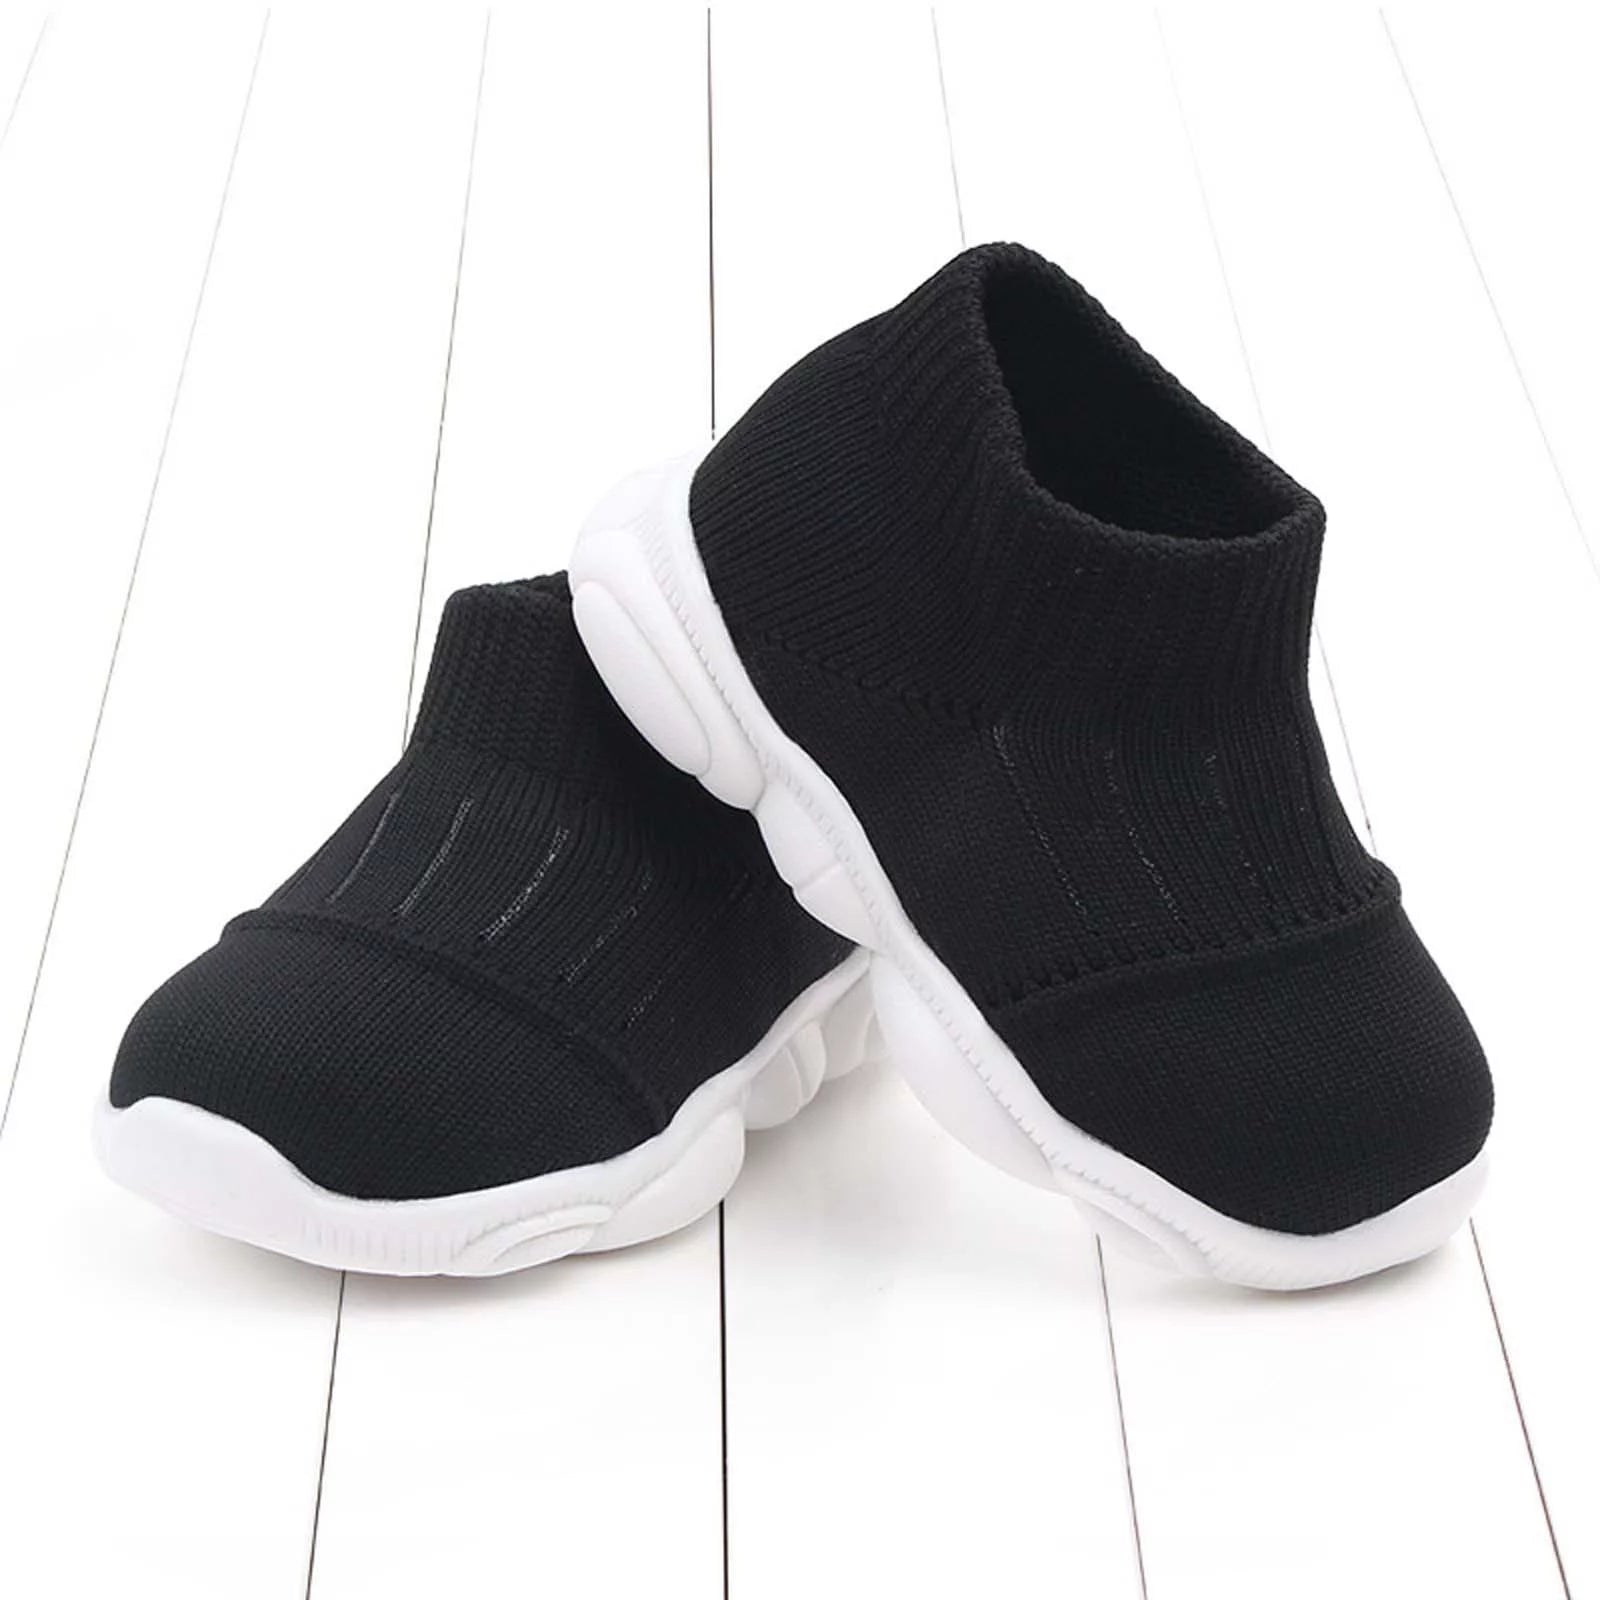 Toddler Shoes Clearance Toddler Infant Baby Girls Boys Casual Shoes Flying Woven Toddler Shoes Black 9-12 Months